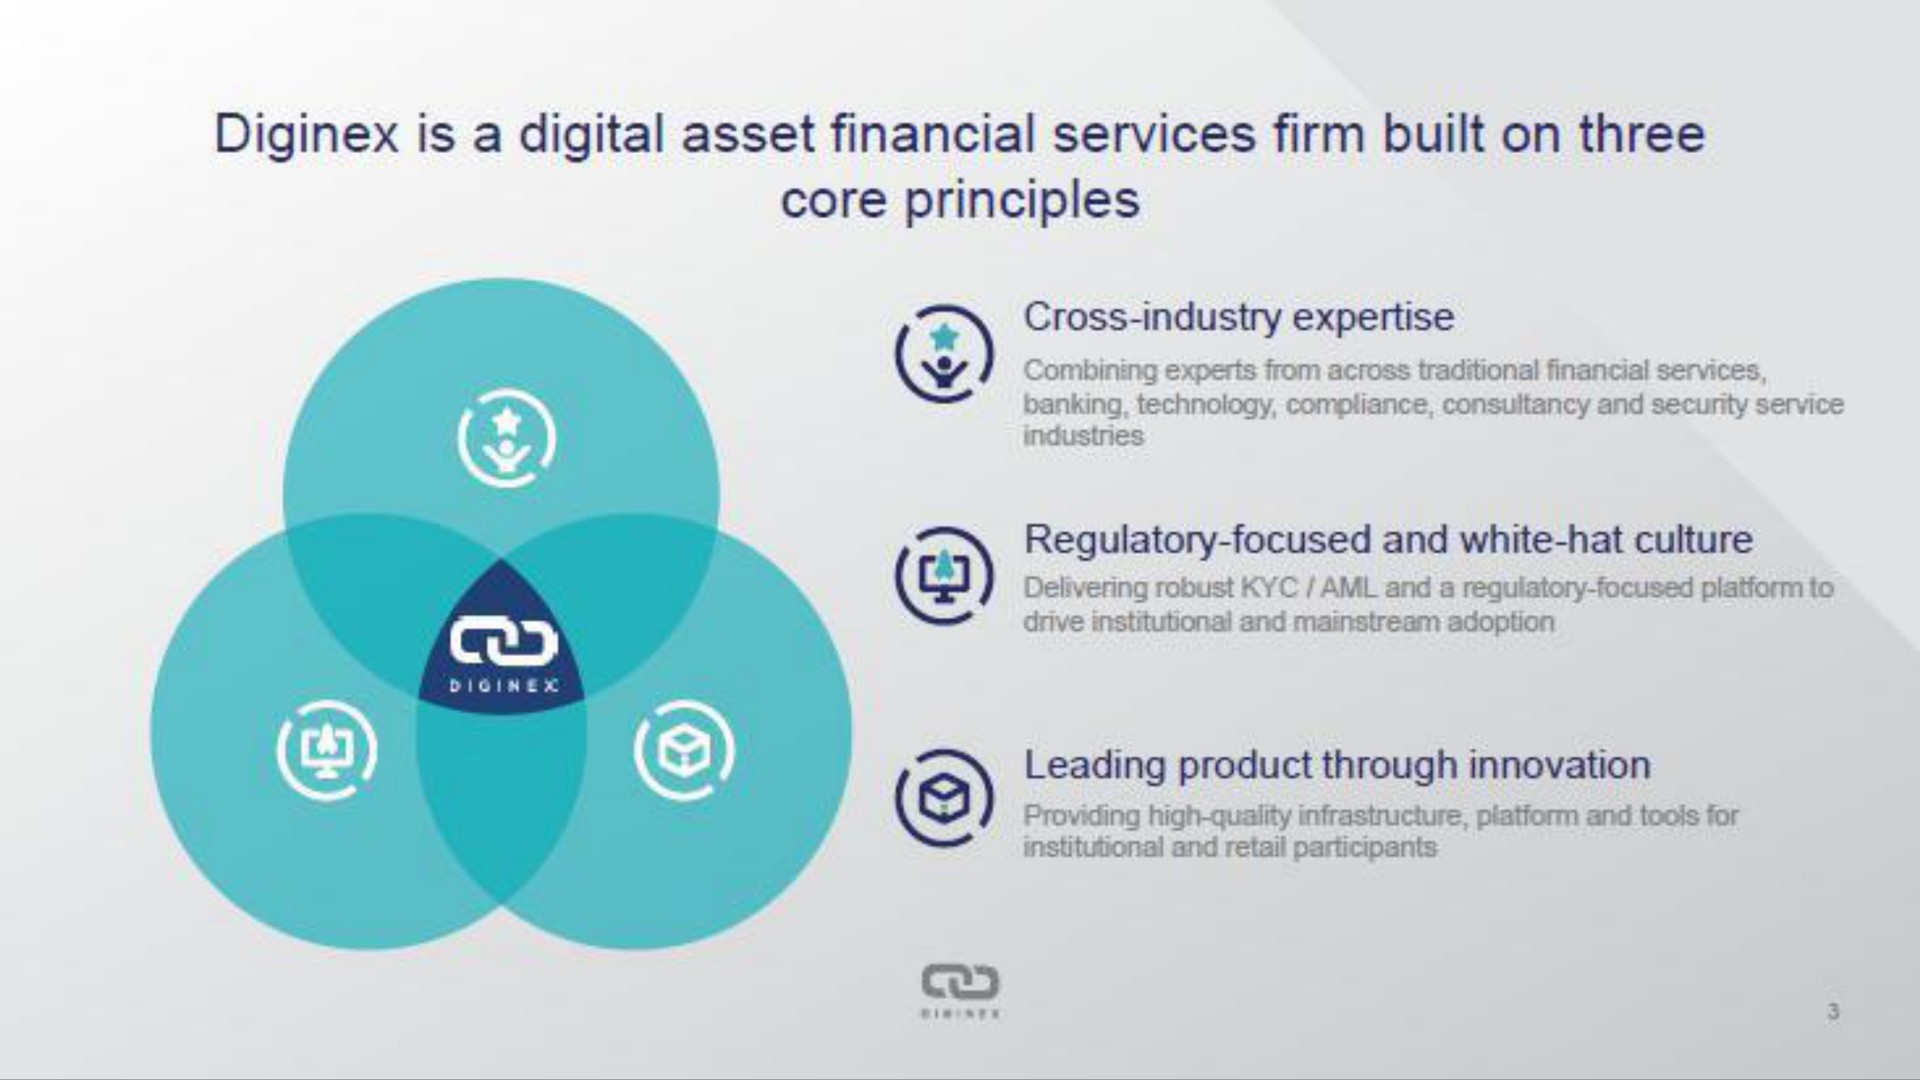 is a digital asset financial services firm built on three core principles | Diginex